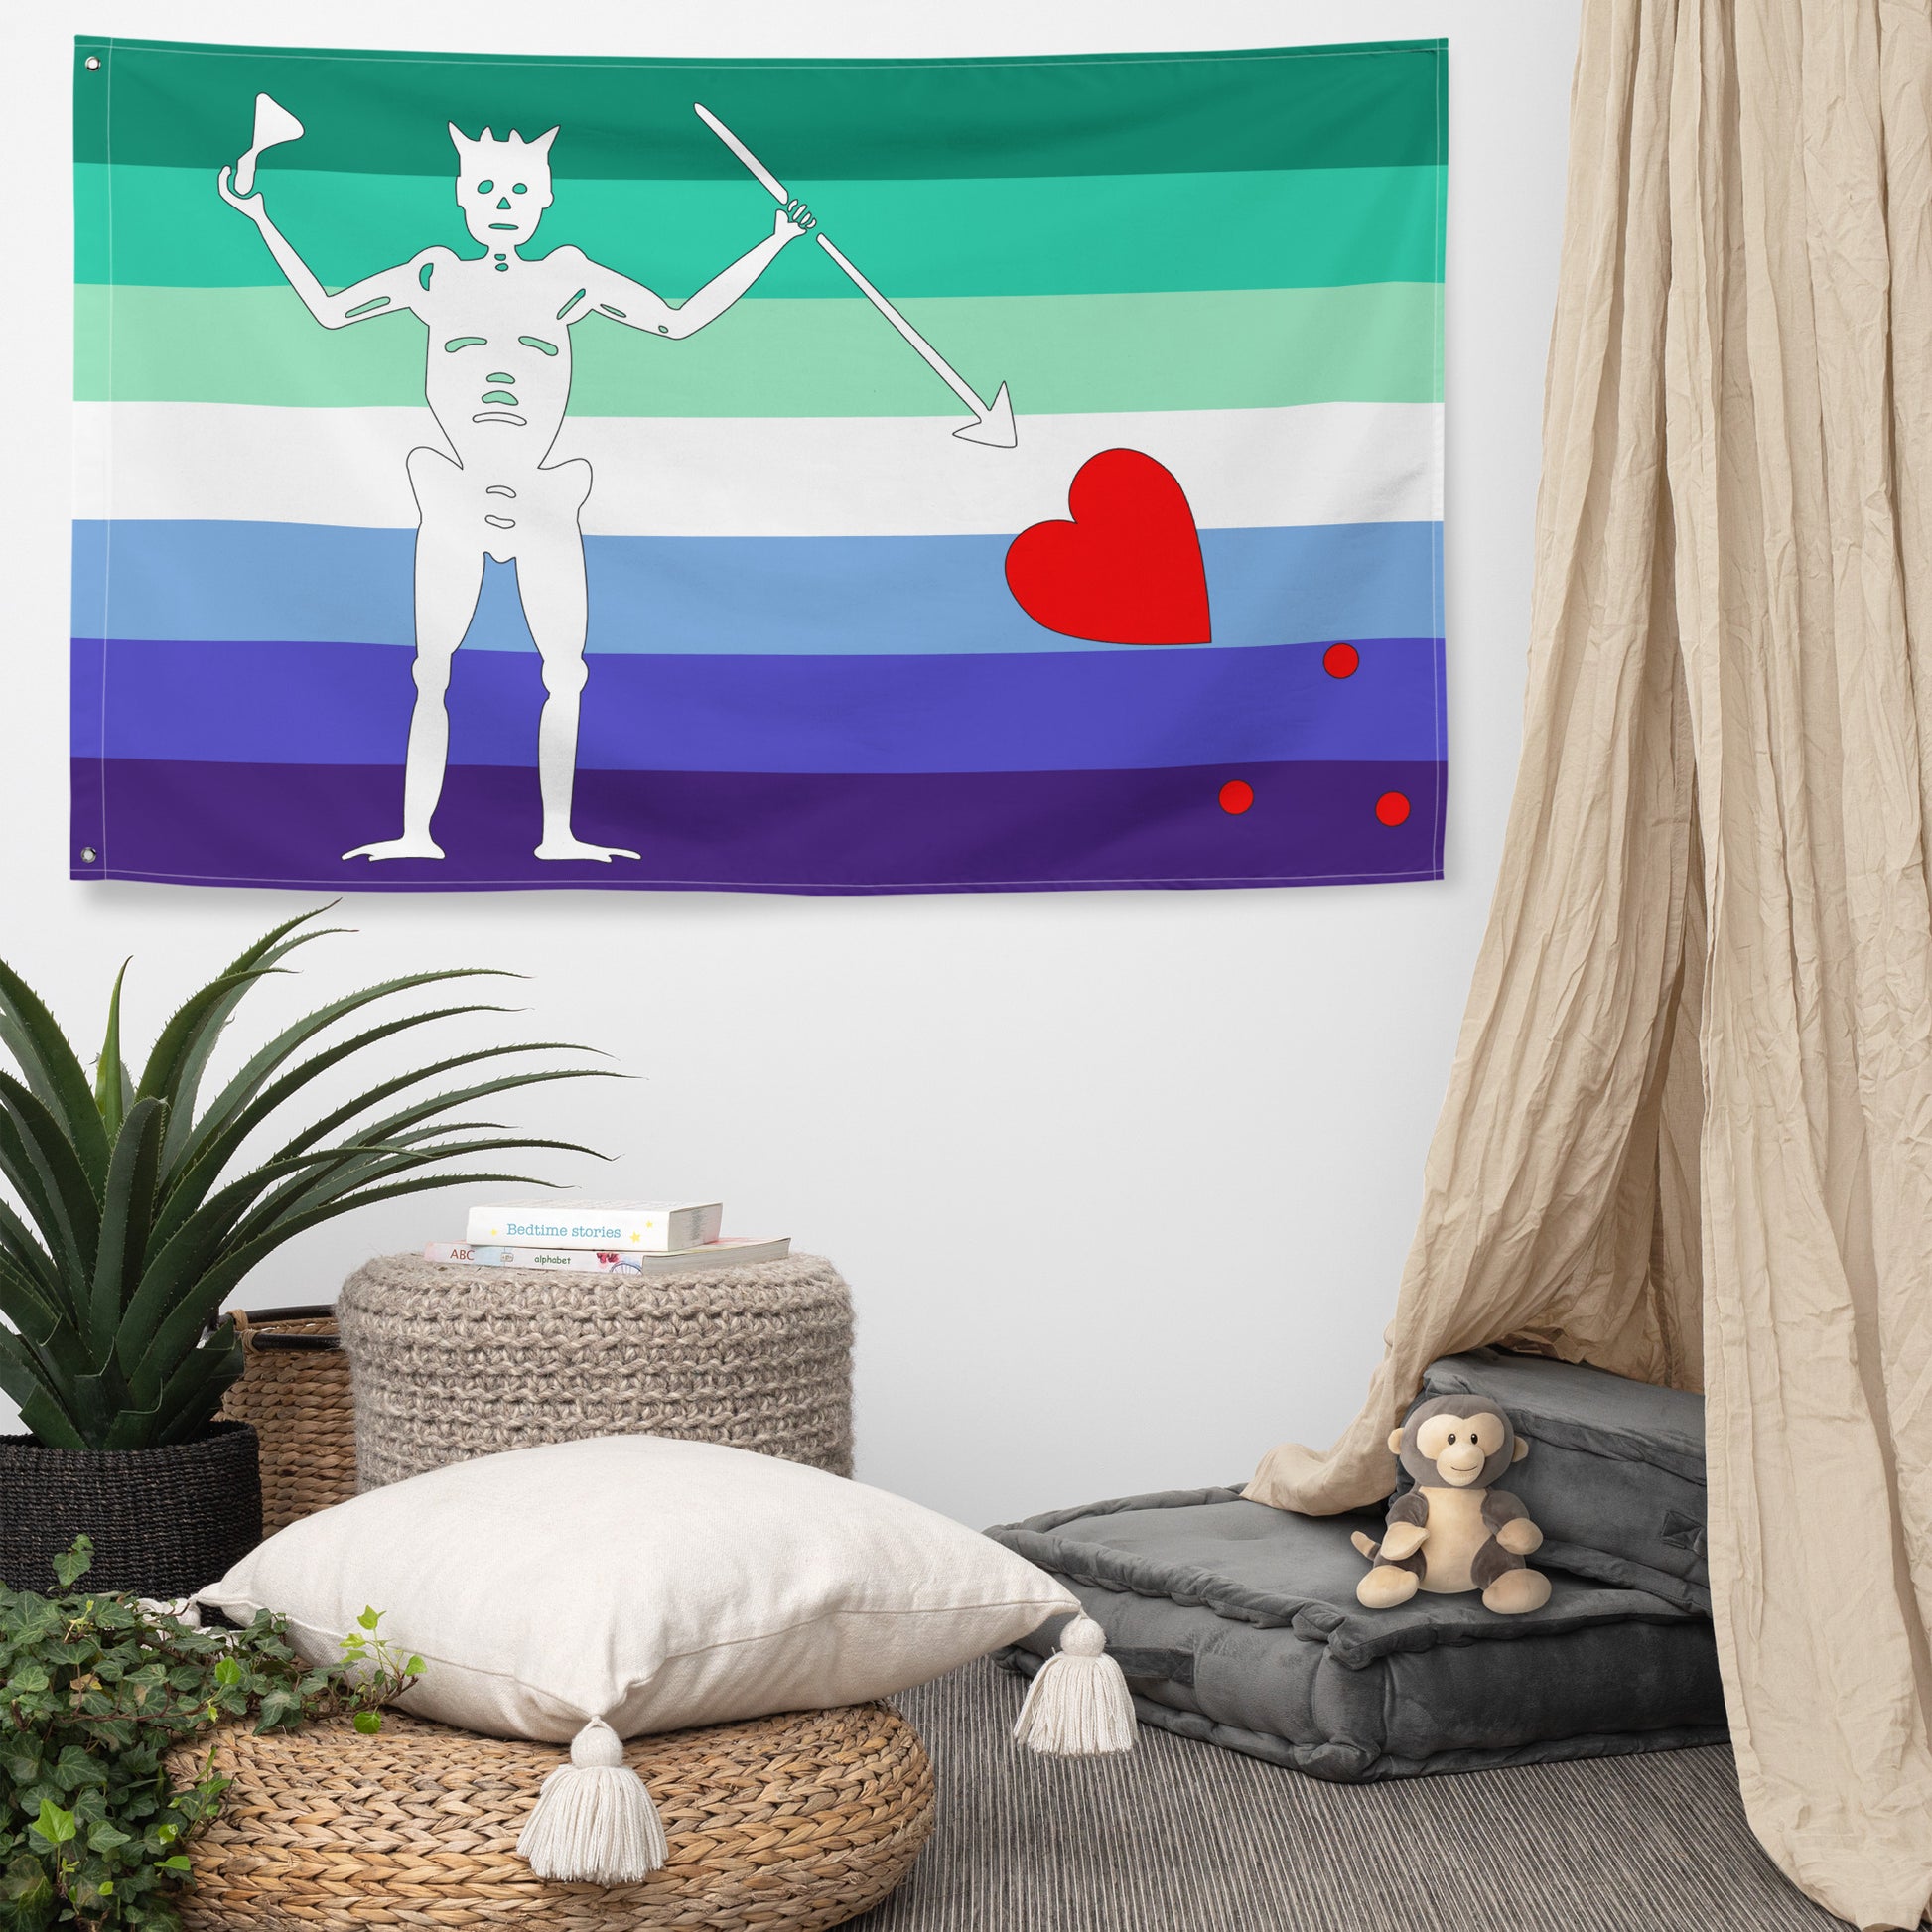 gay mlm blackbeard flag hanging on a white wall next to a curtain and above some cushions, an ottoman, and plants